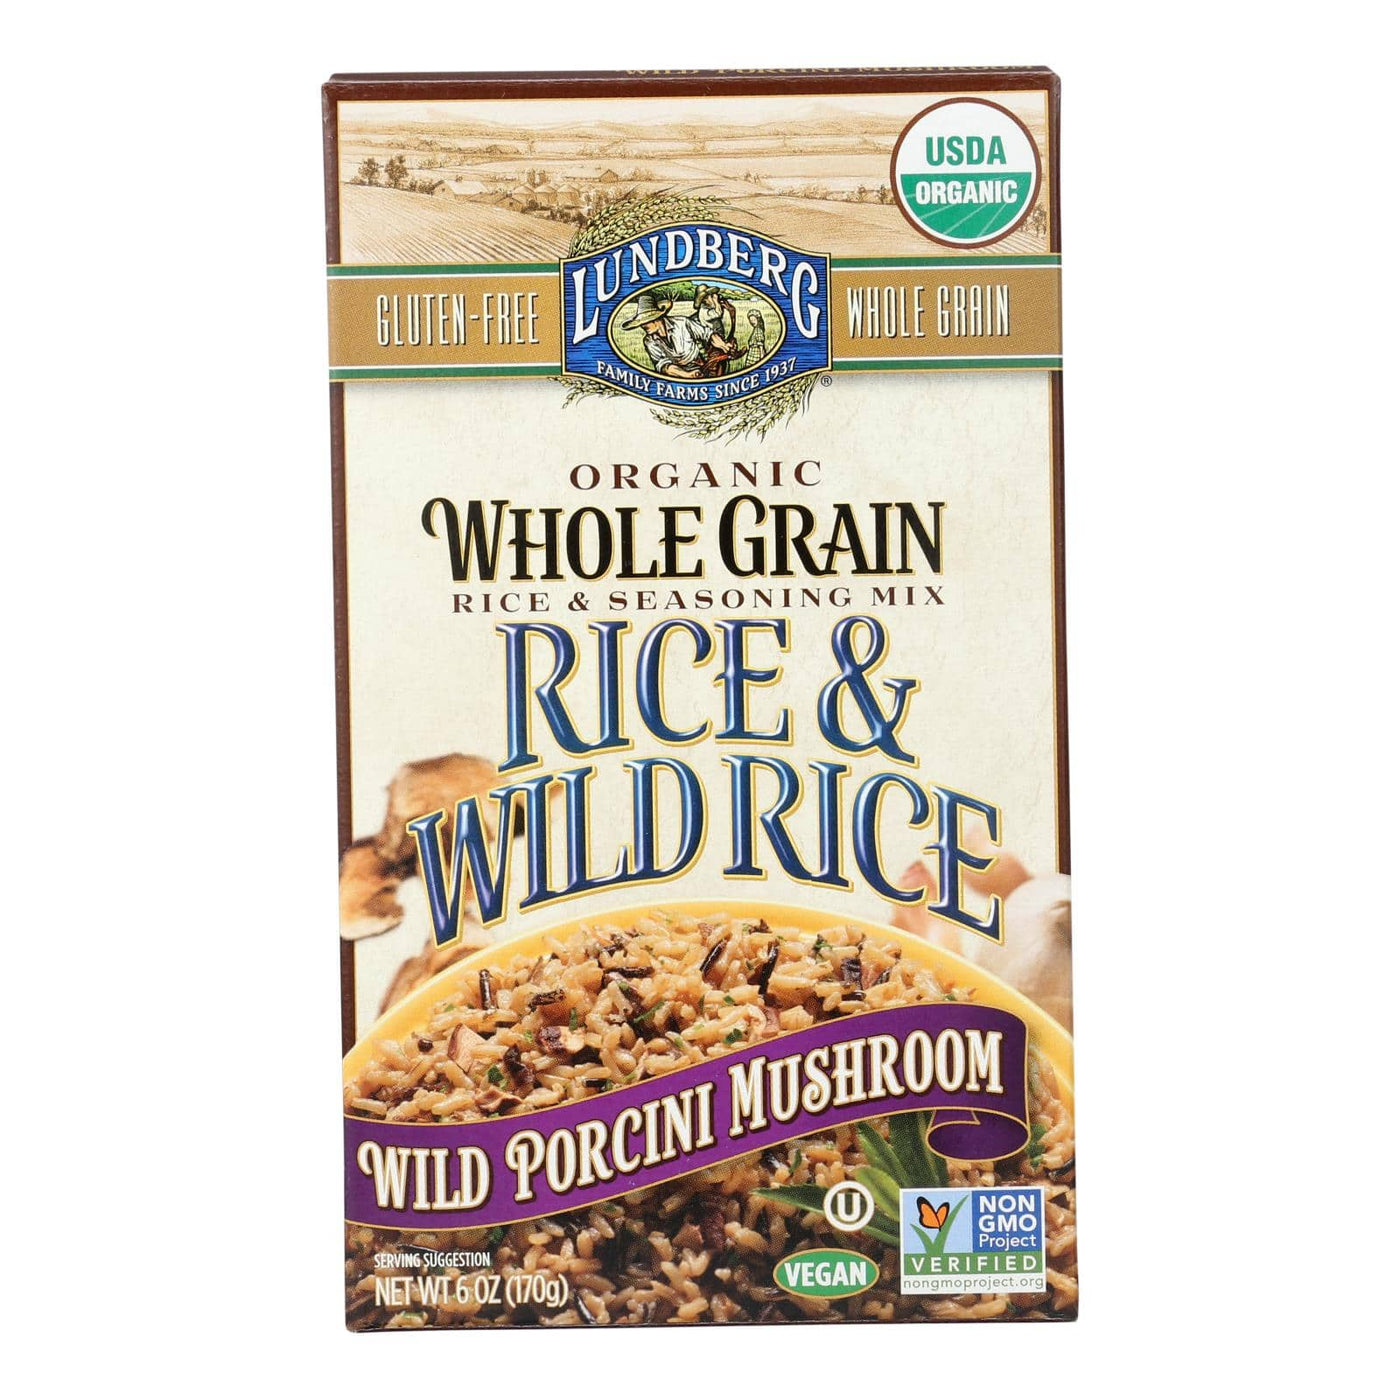 Buy Lundberg Family Farms Whole Grain Rice And Wild Rice - Case Of 6 - 6 Oz.  at OnlyNaturals.us